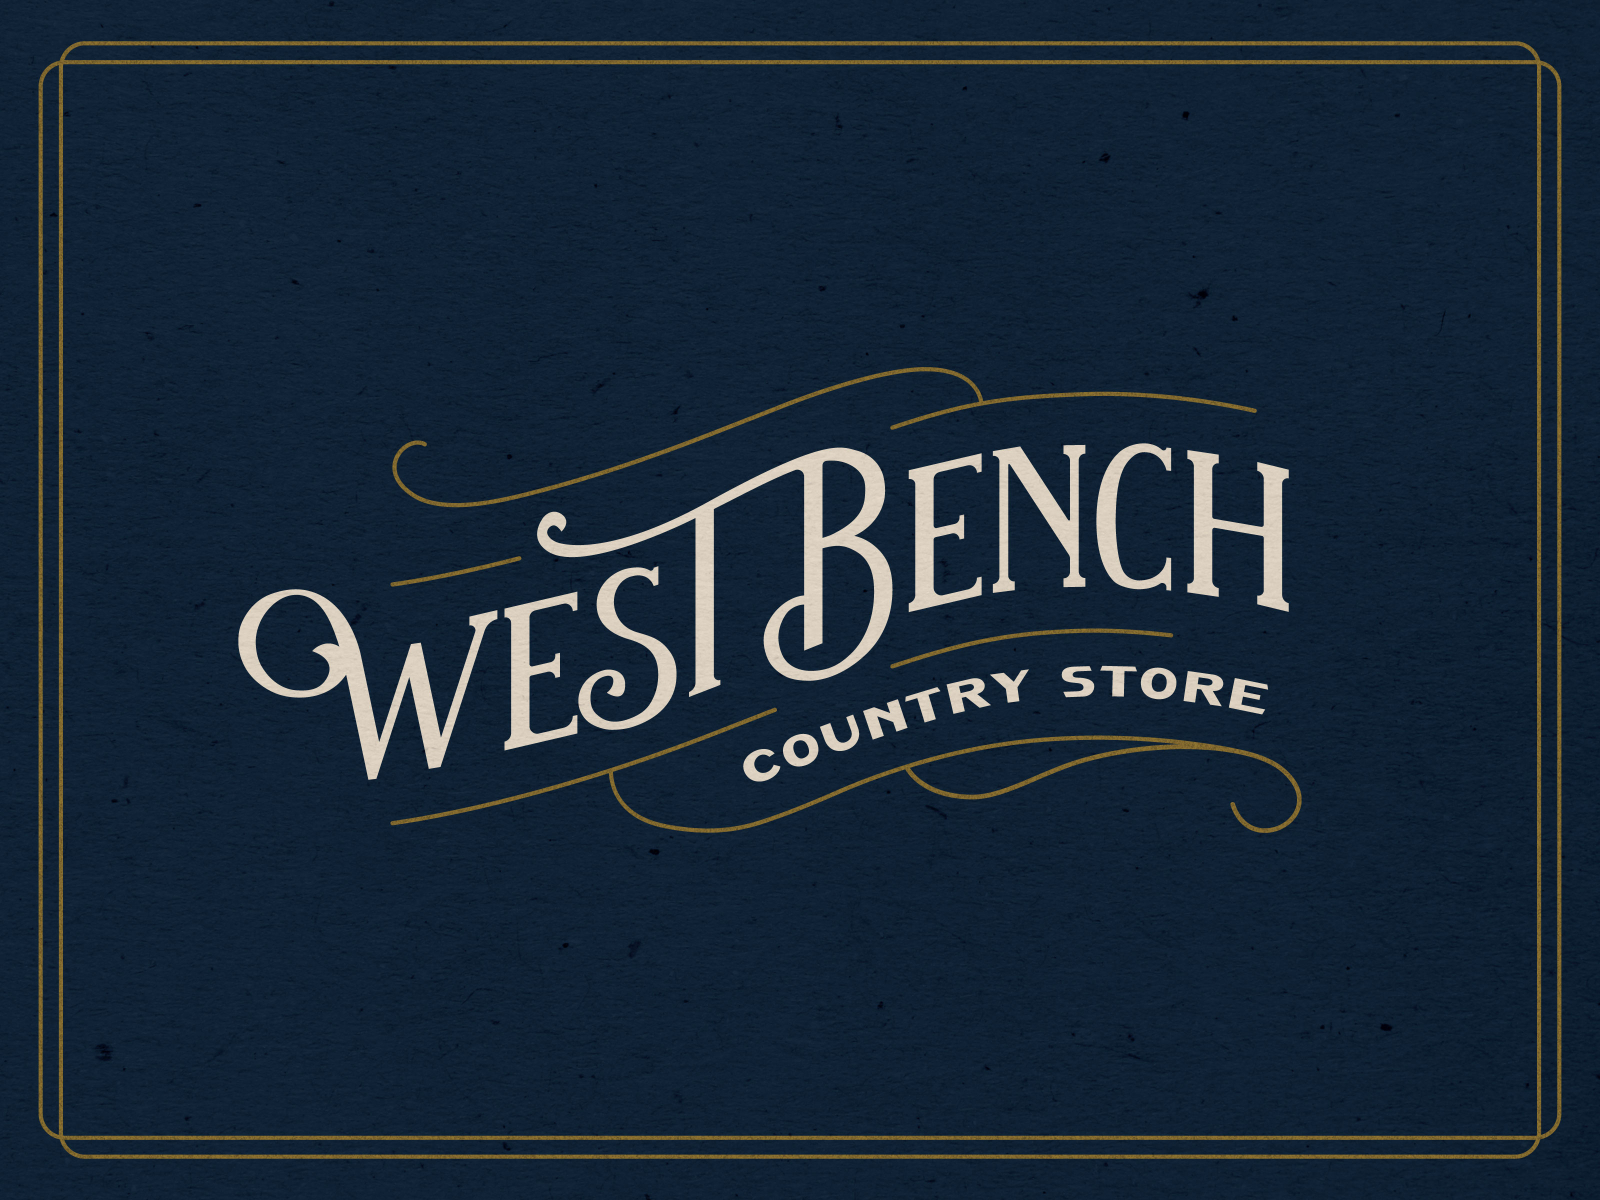 West Bench - Hand Lettered Logotype by Lyndon Gehman on Dribbble